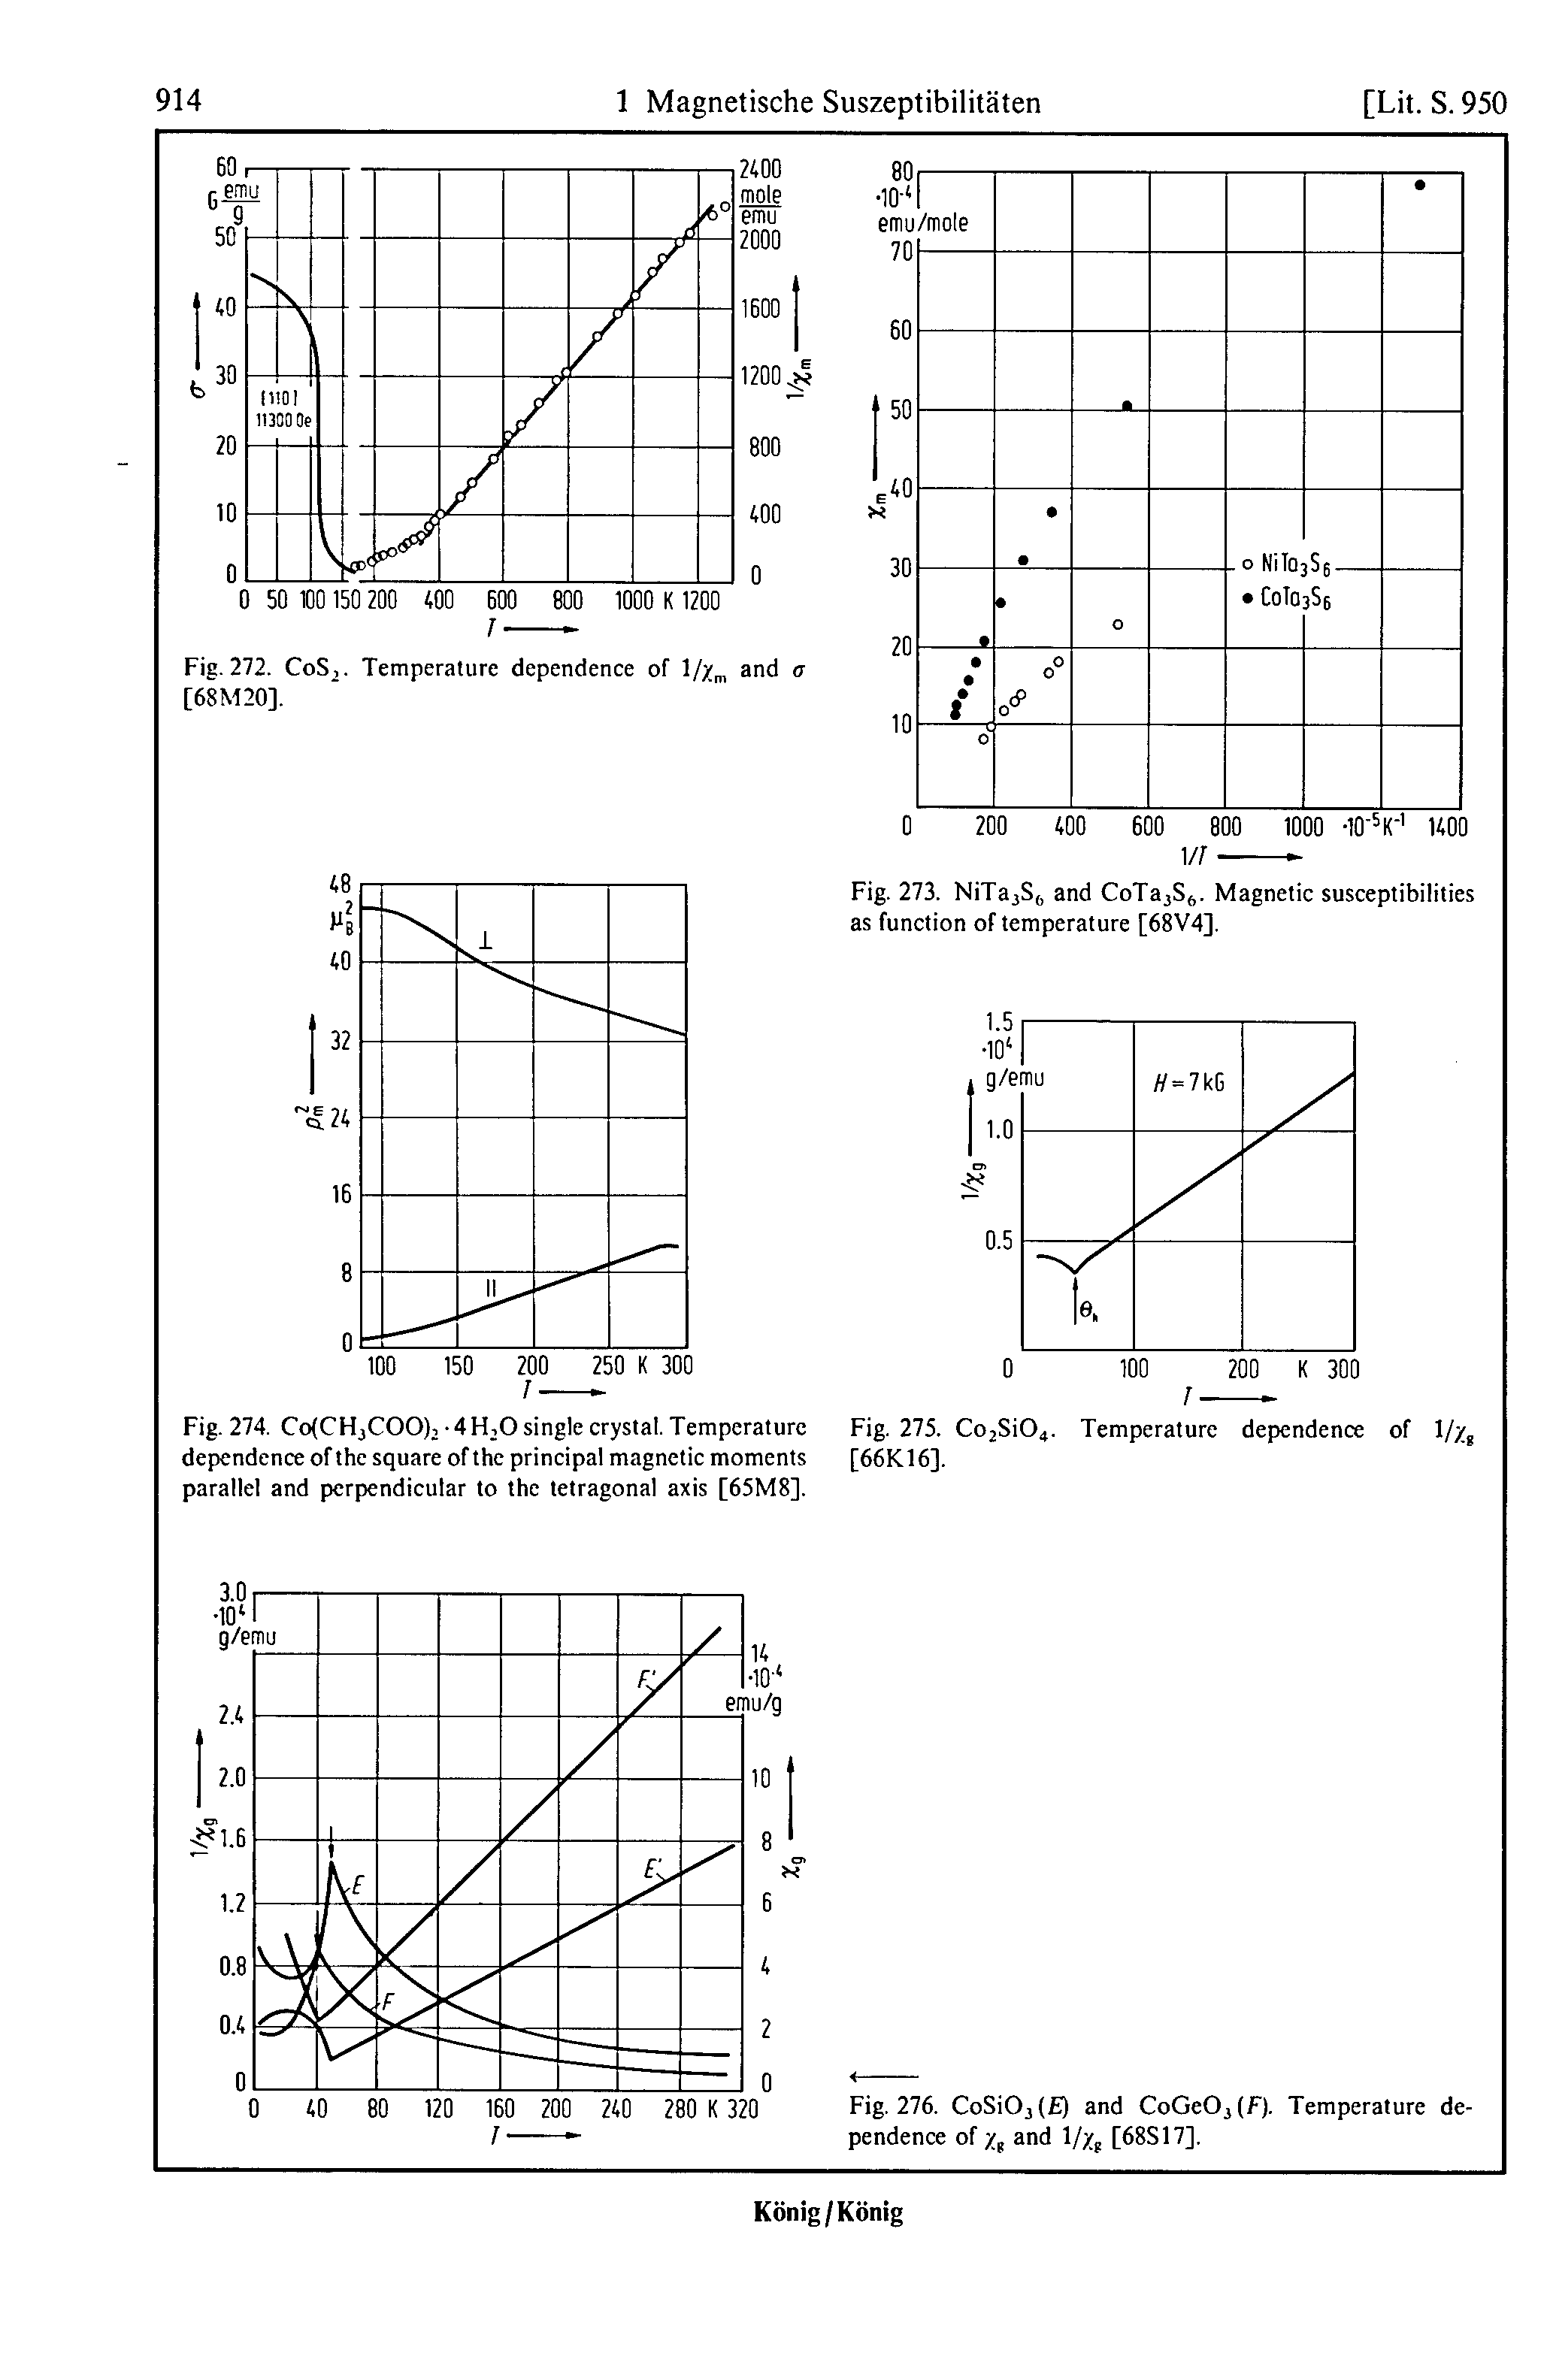 Fig. 274. CotCHjCOO), -4FI,0 single crystal. Temperature dependence of the square of the principal magnetic moments parallel and perpendicular to the tetragonal axis [65M8].